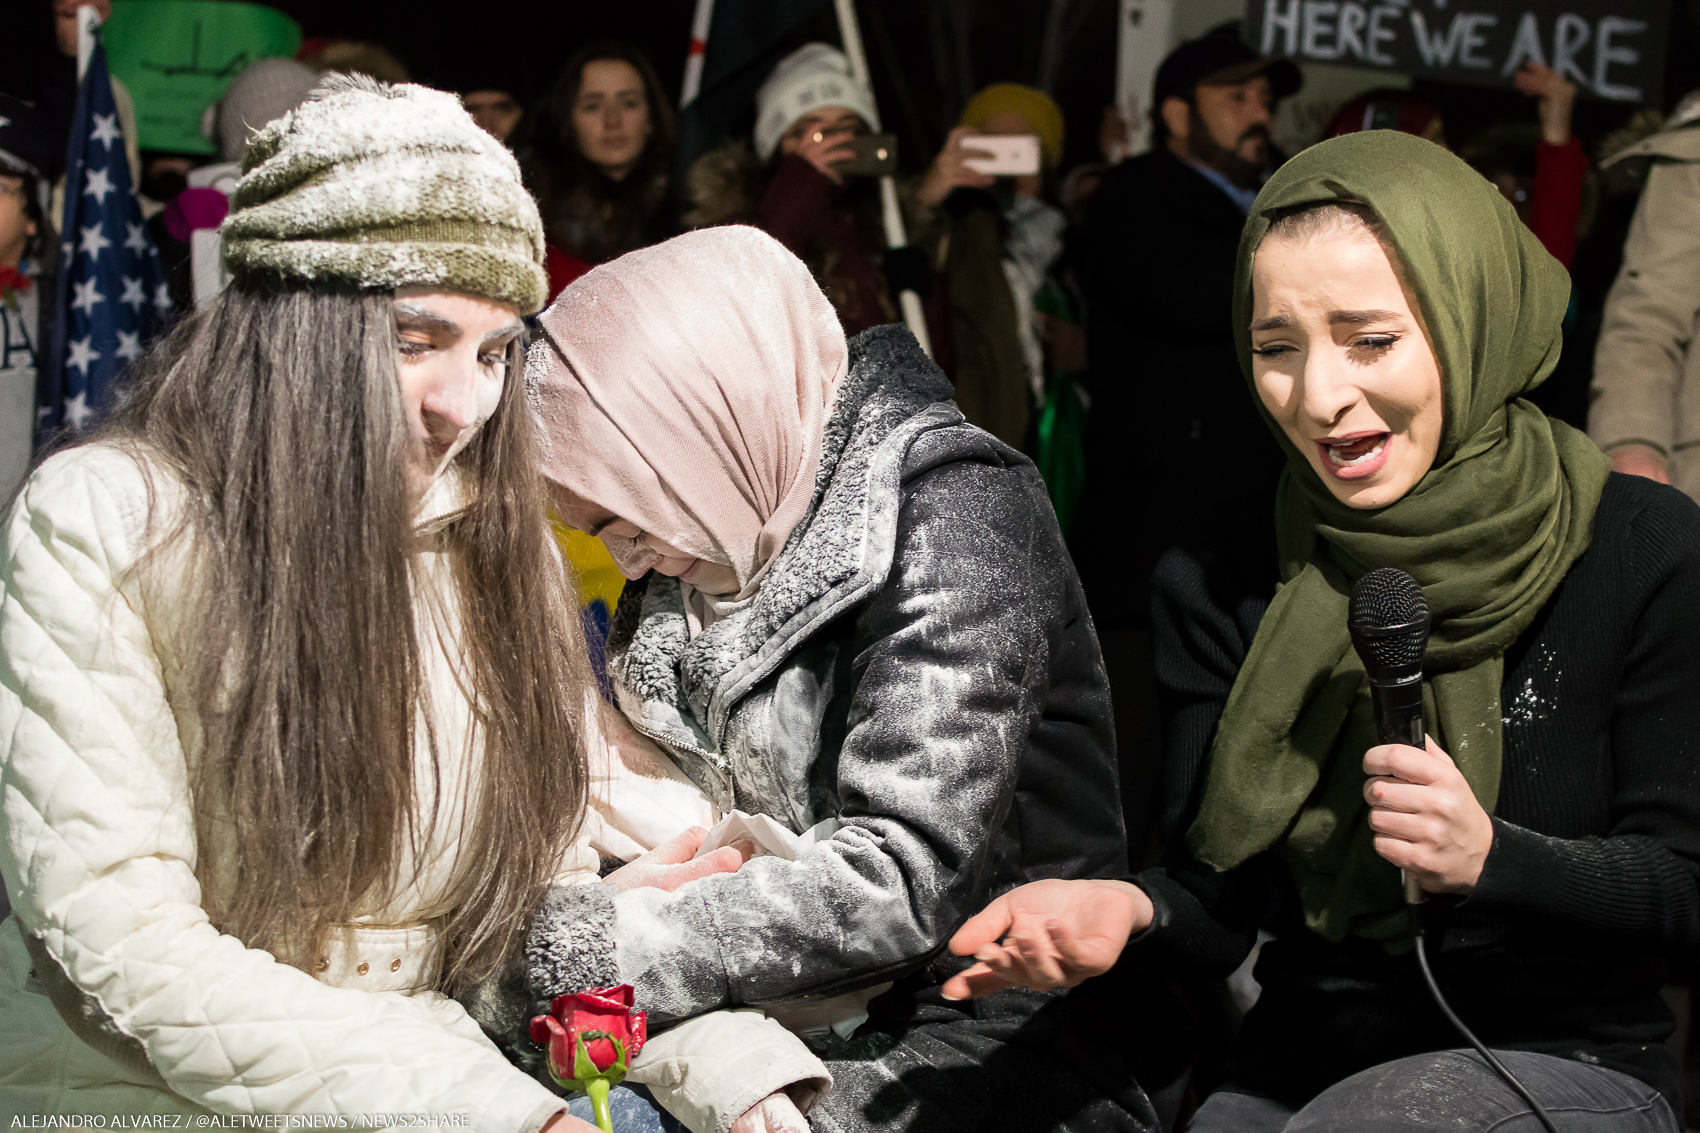 Meriem Abou-Ghazaleh recreates what life is like for Aleppo civilians during a vigil outside the White House on Dec. 16.